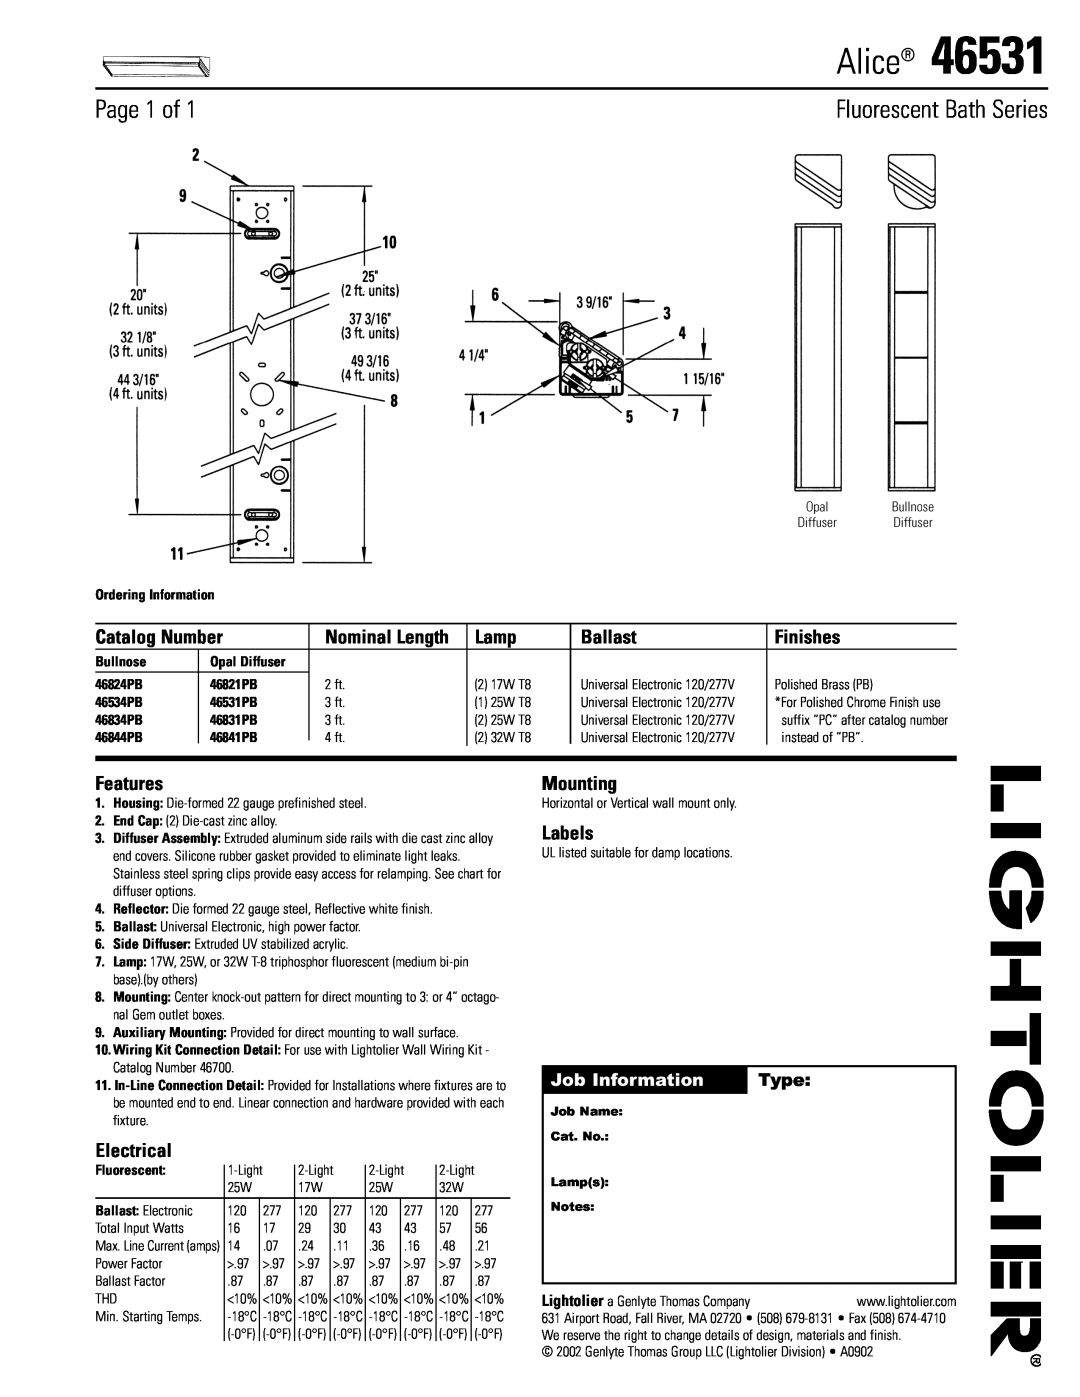 Lightolier 46531 manual Alice, Page 1 of, Fluorescent Bath Series, Catalog Number, Lamp, Ballast, Finishes, Features, Type 